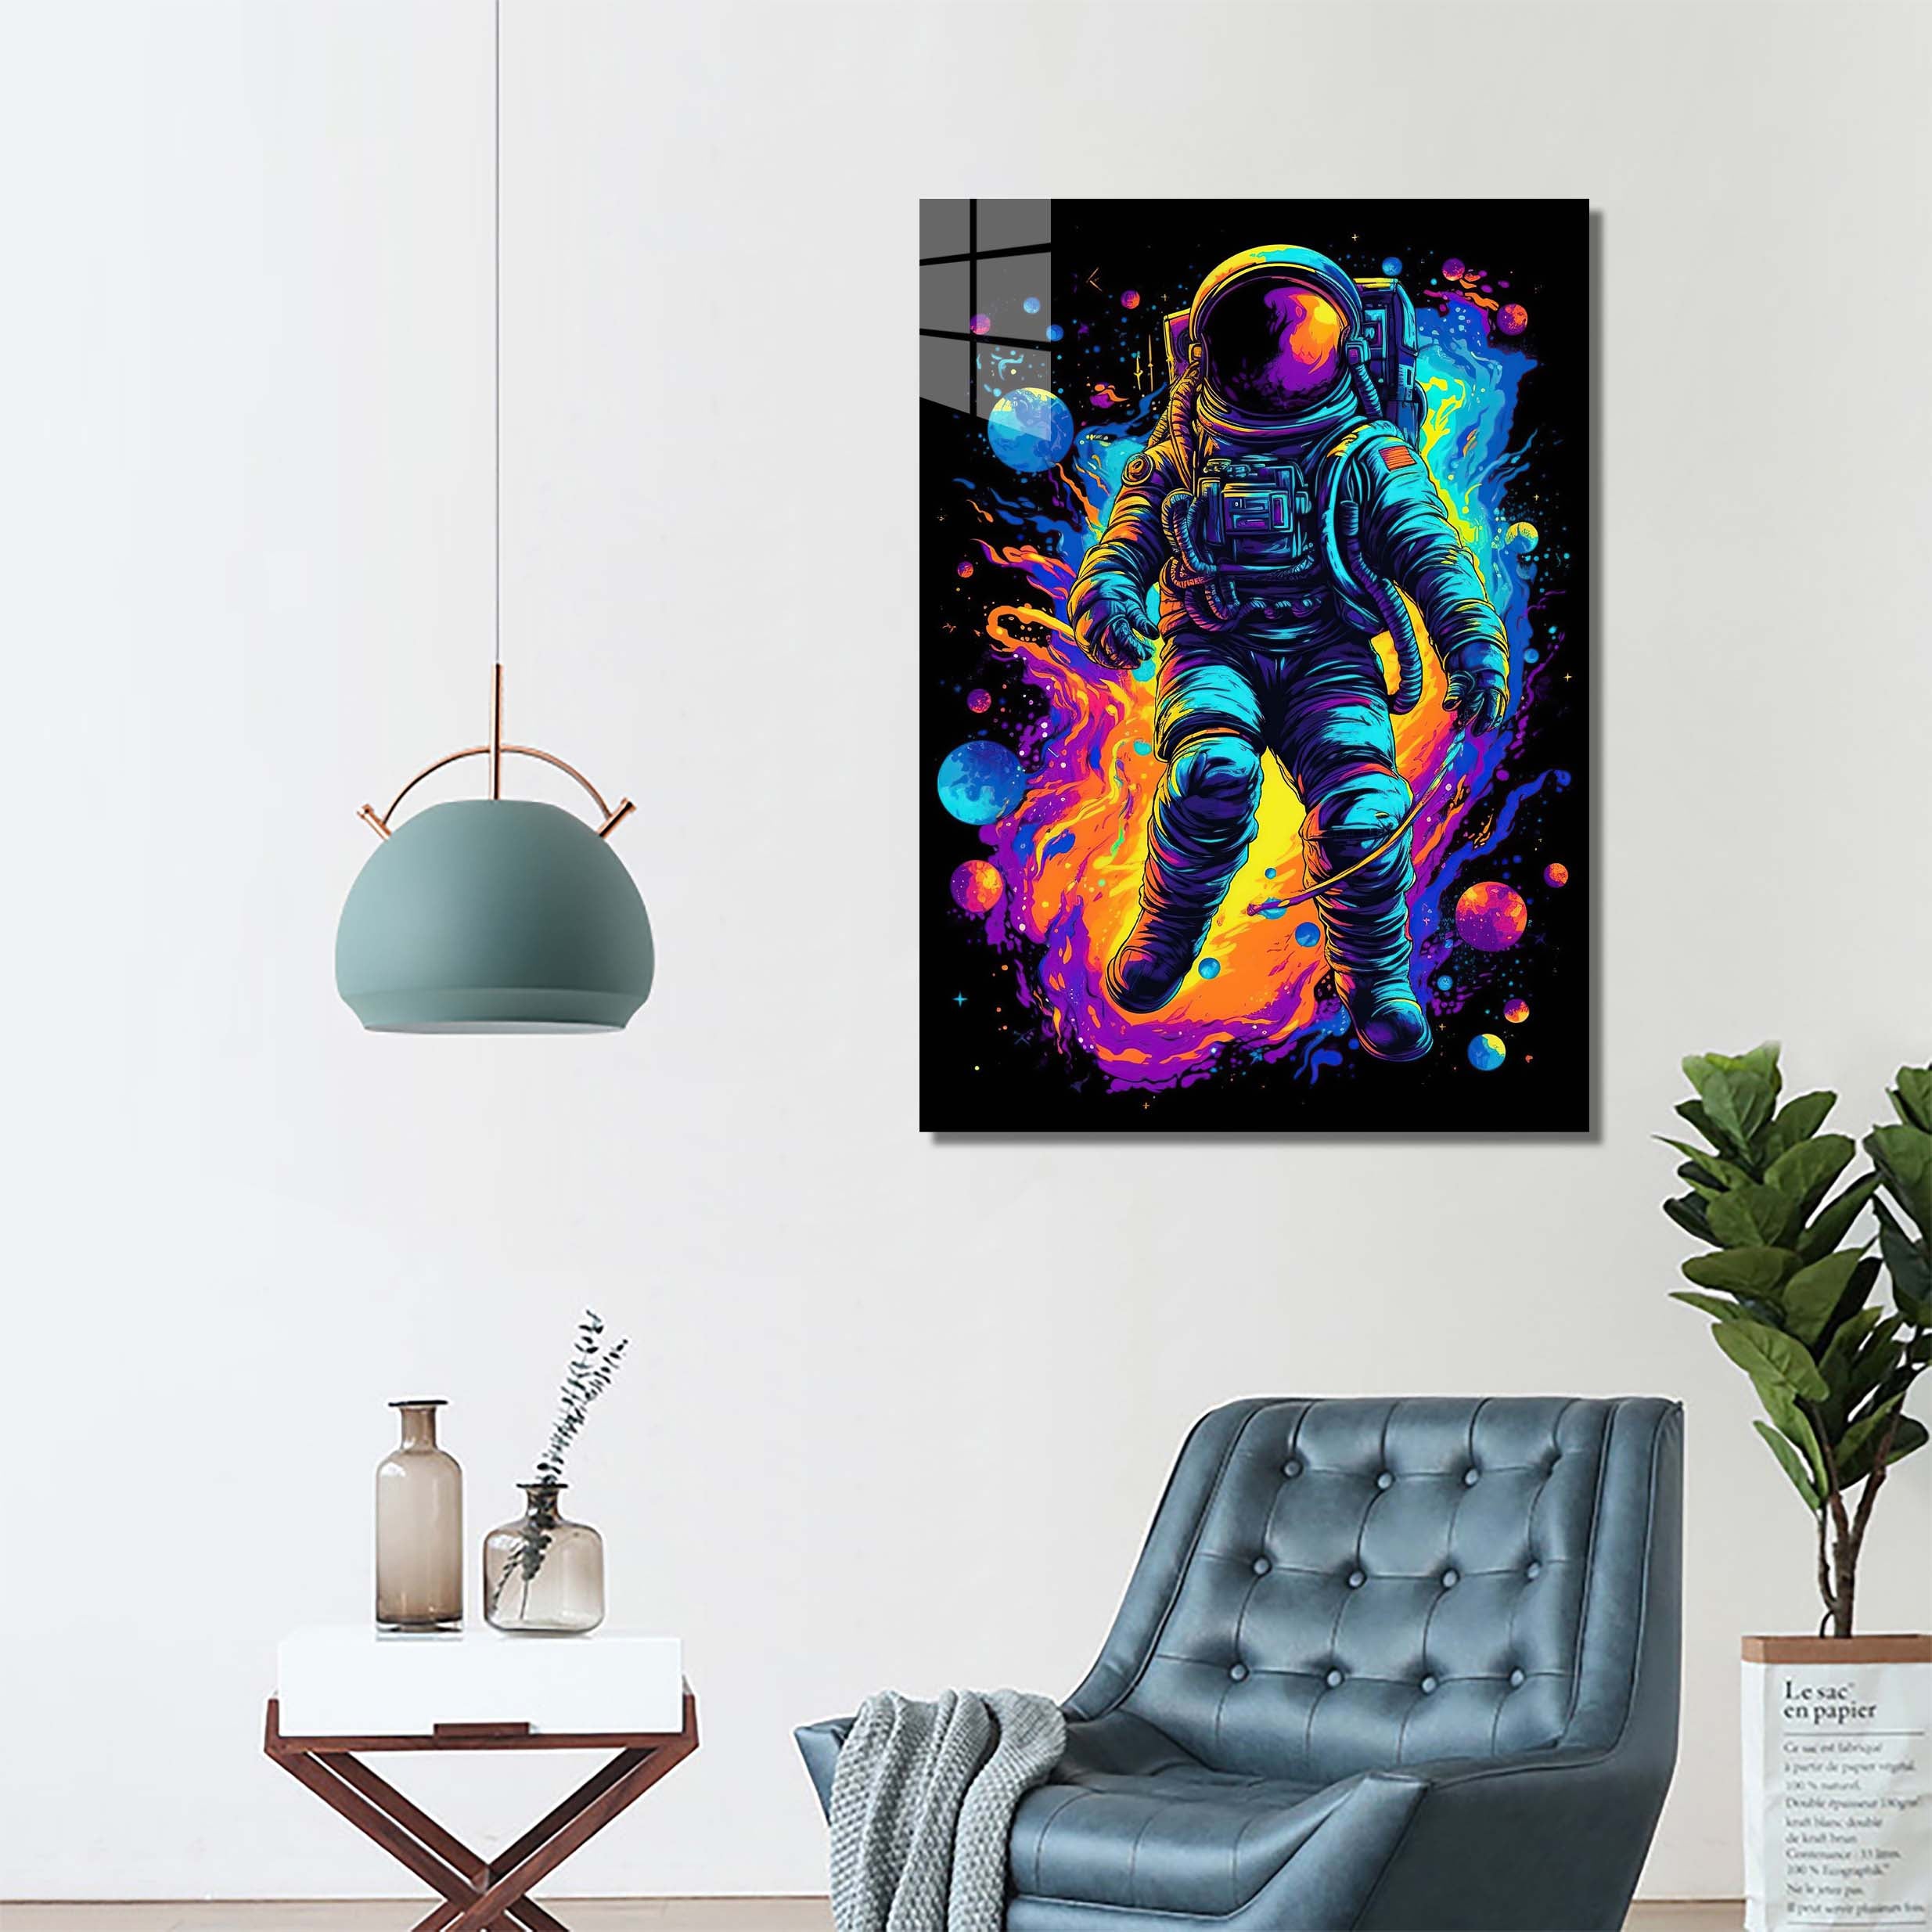 Psychedelic Astronaut 3-designed by @SAMCRO